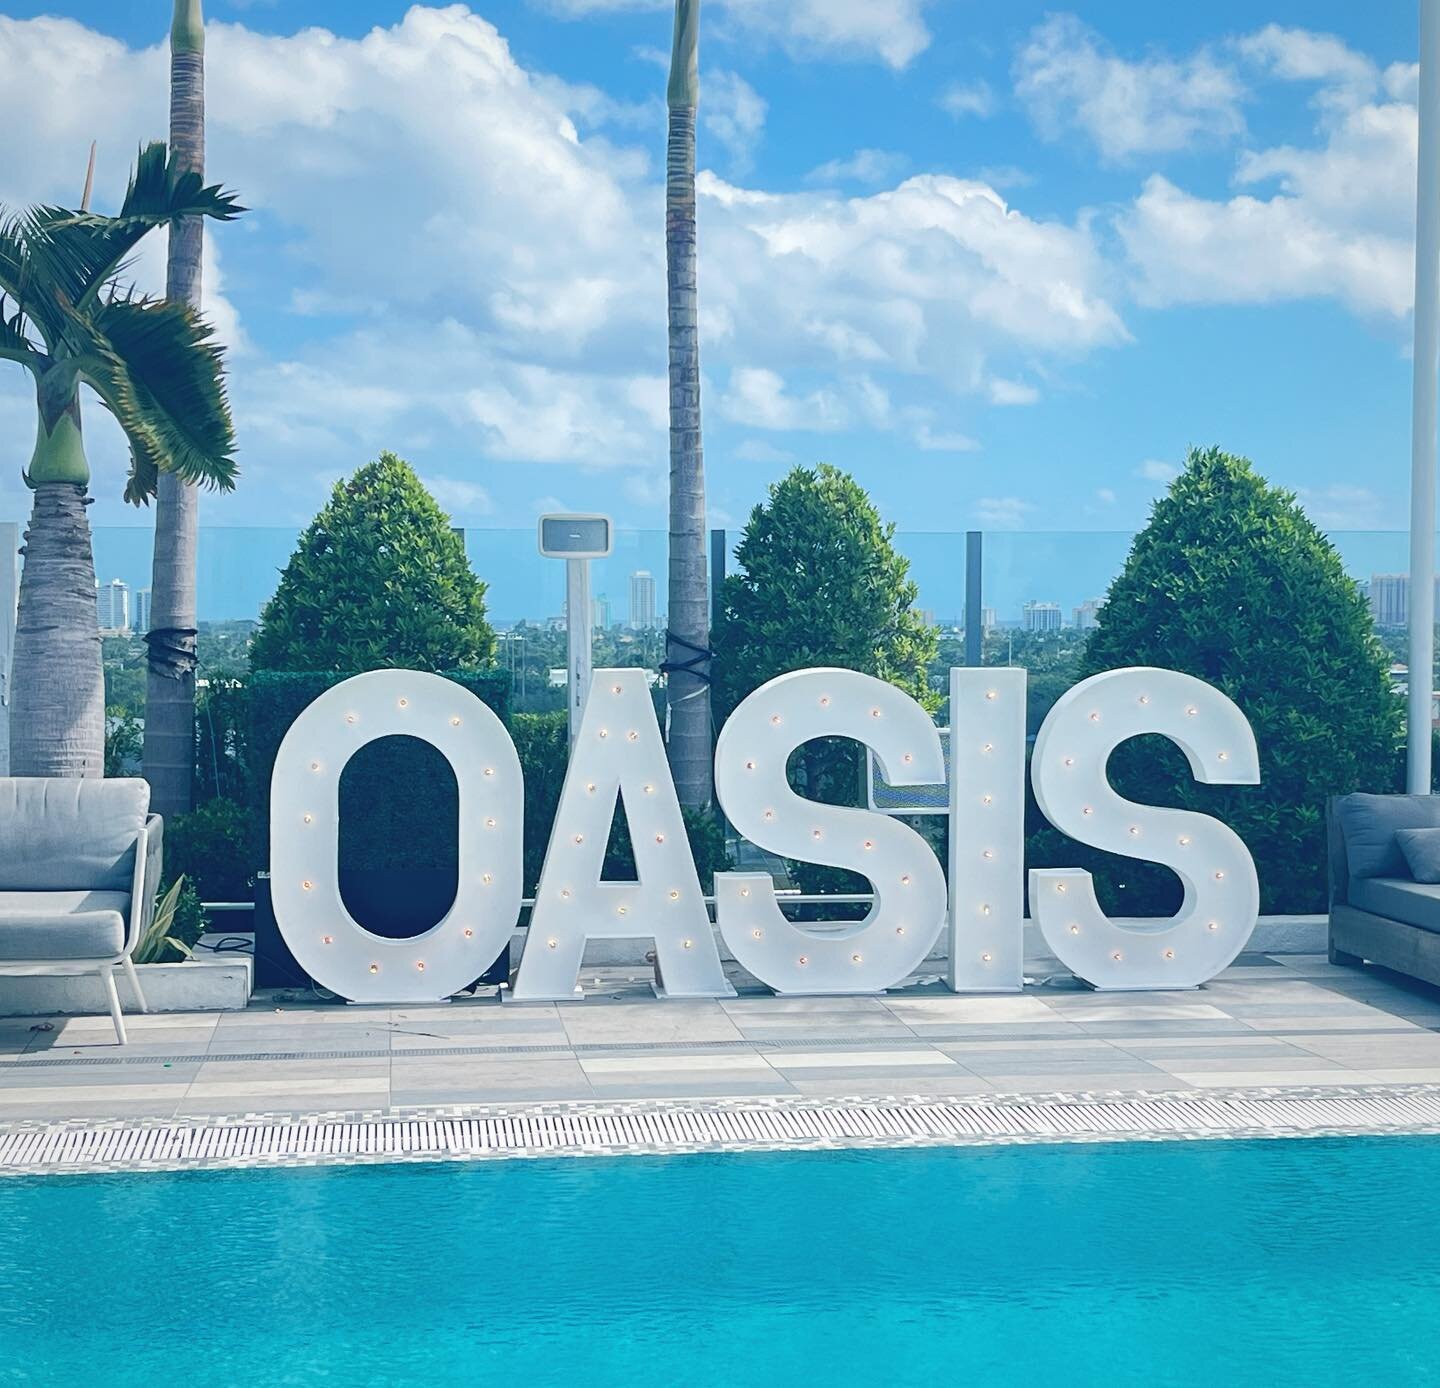 Make a statement with our 4 ft marquee letters, available for rental or purchase 
 #marqueeletters #eventdecor #partyrental #fortlauderdale #poolpartydecor #oasis